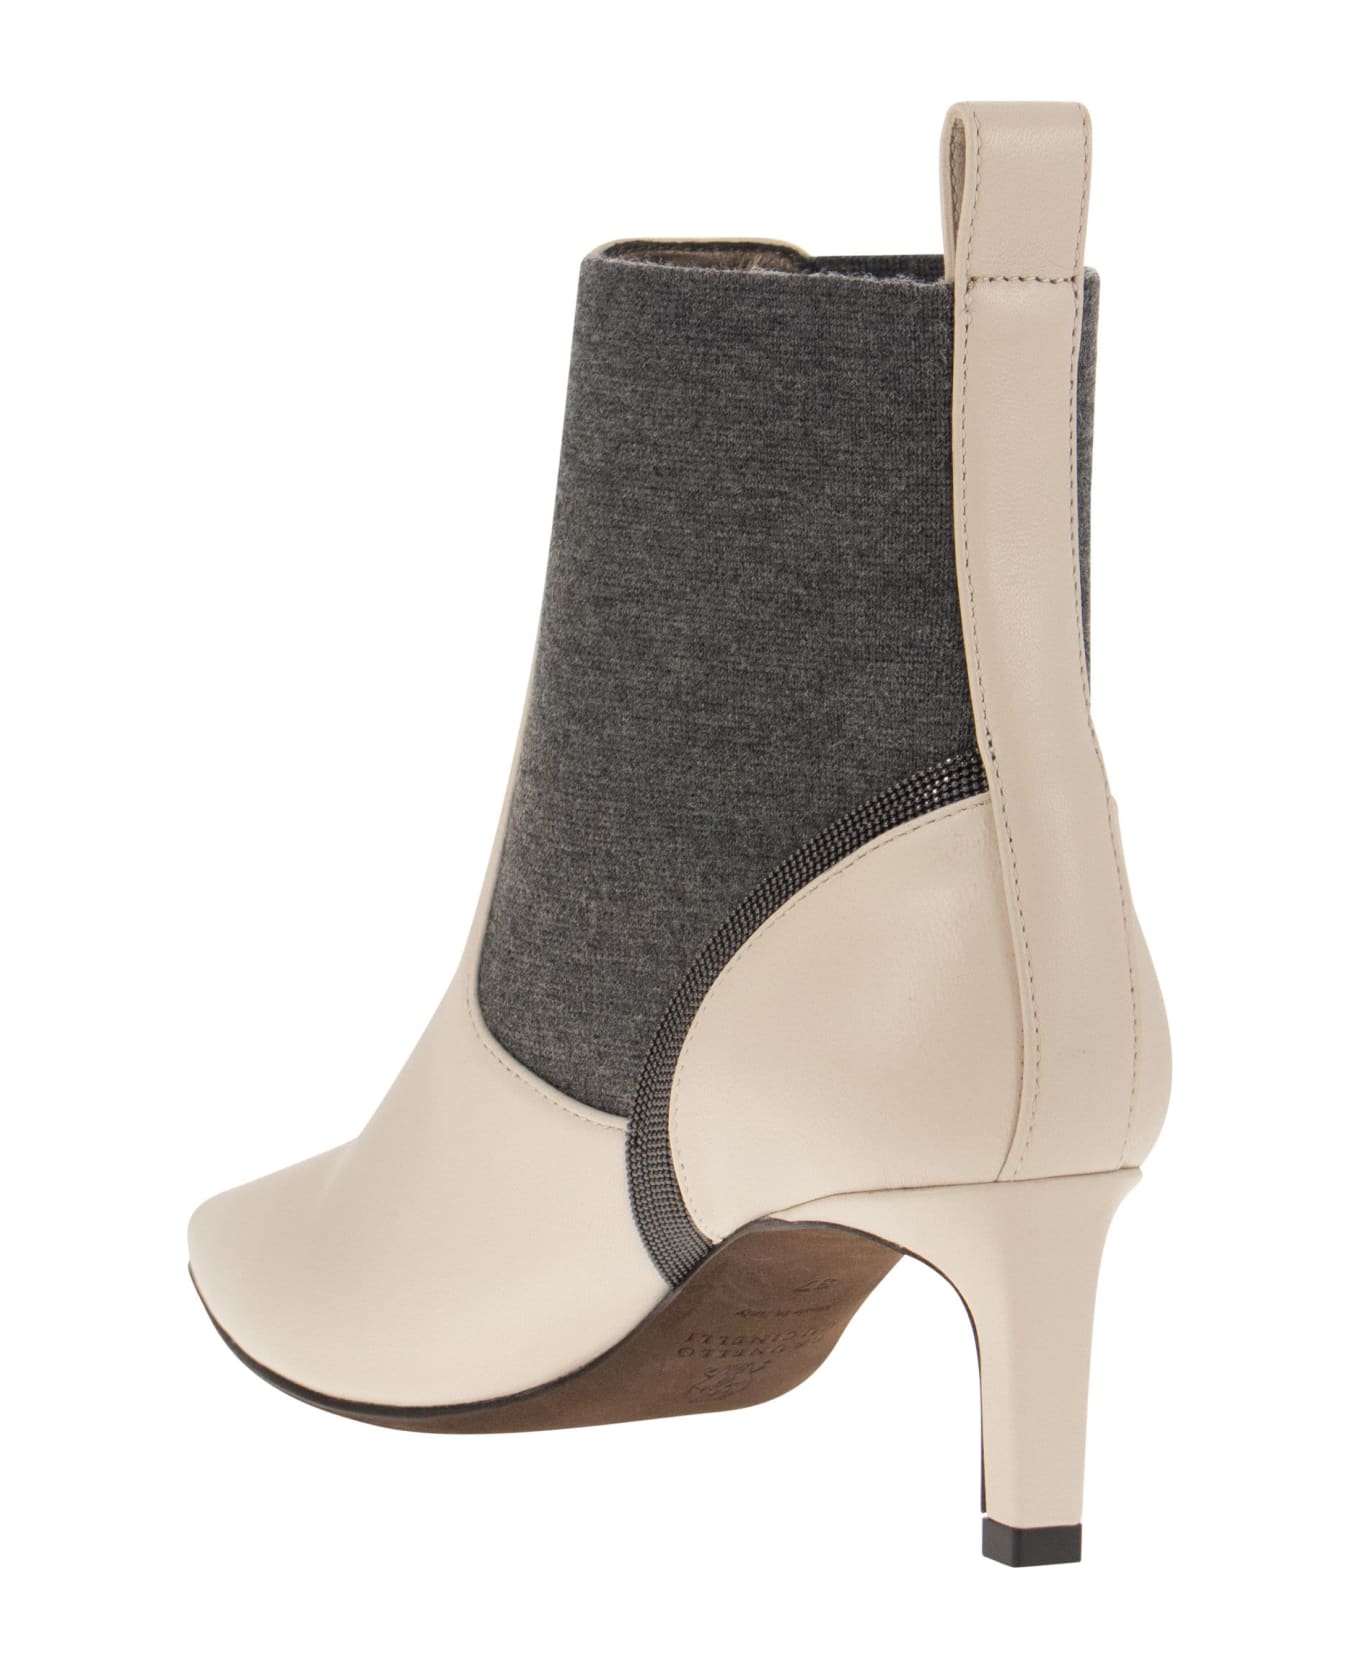 Brunello Cucinelli Leather Heeled Ankle Boots With Shiny Contour - Ivory/grey